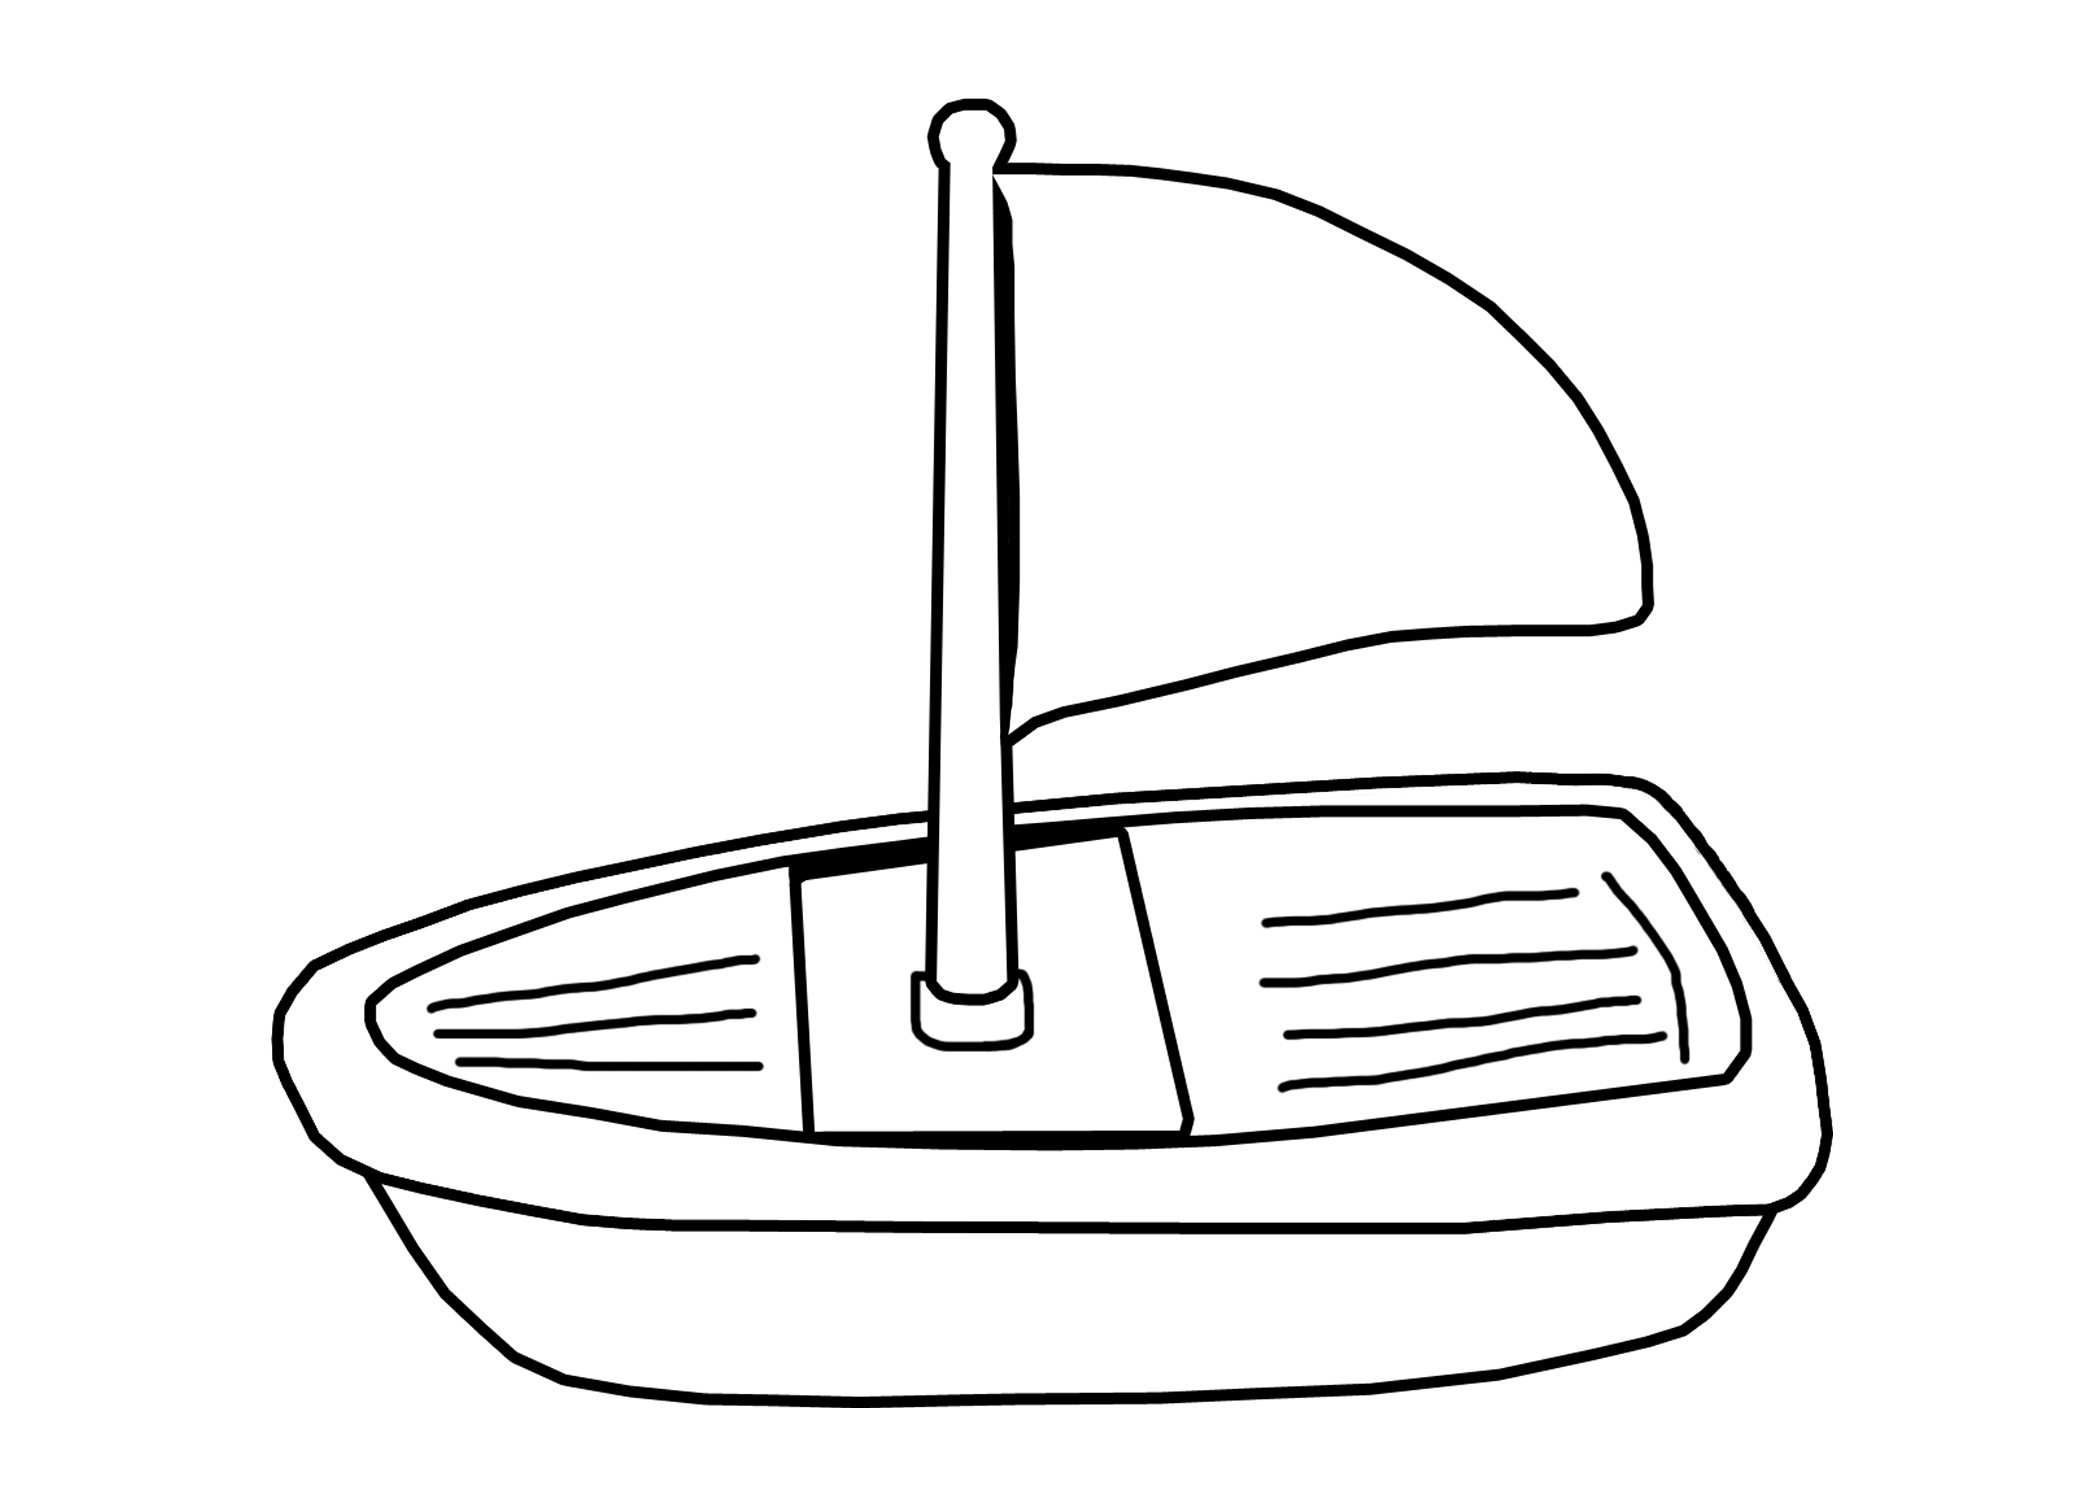 toy boat coloring page id 49761 : Uncategorized - yoand.biz